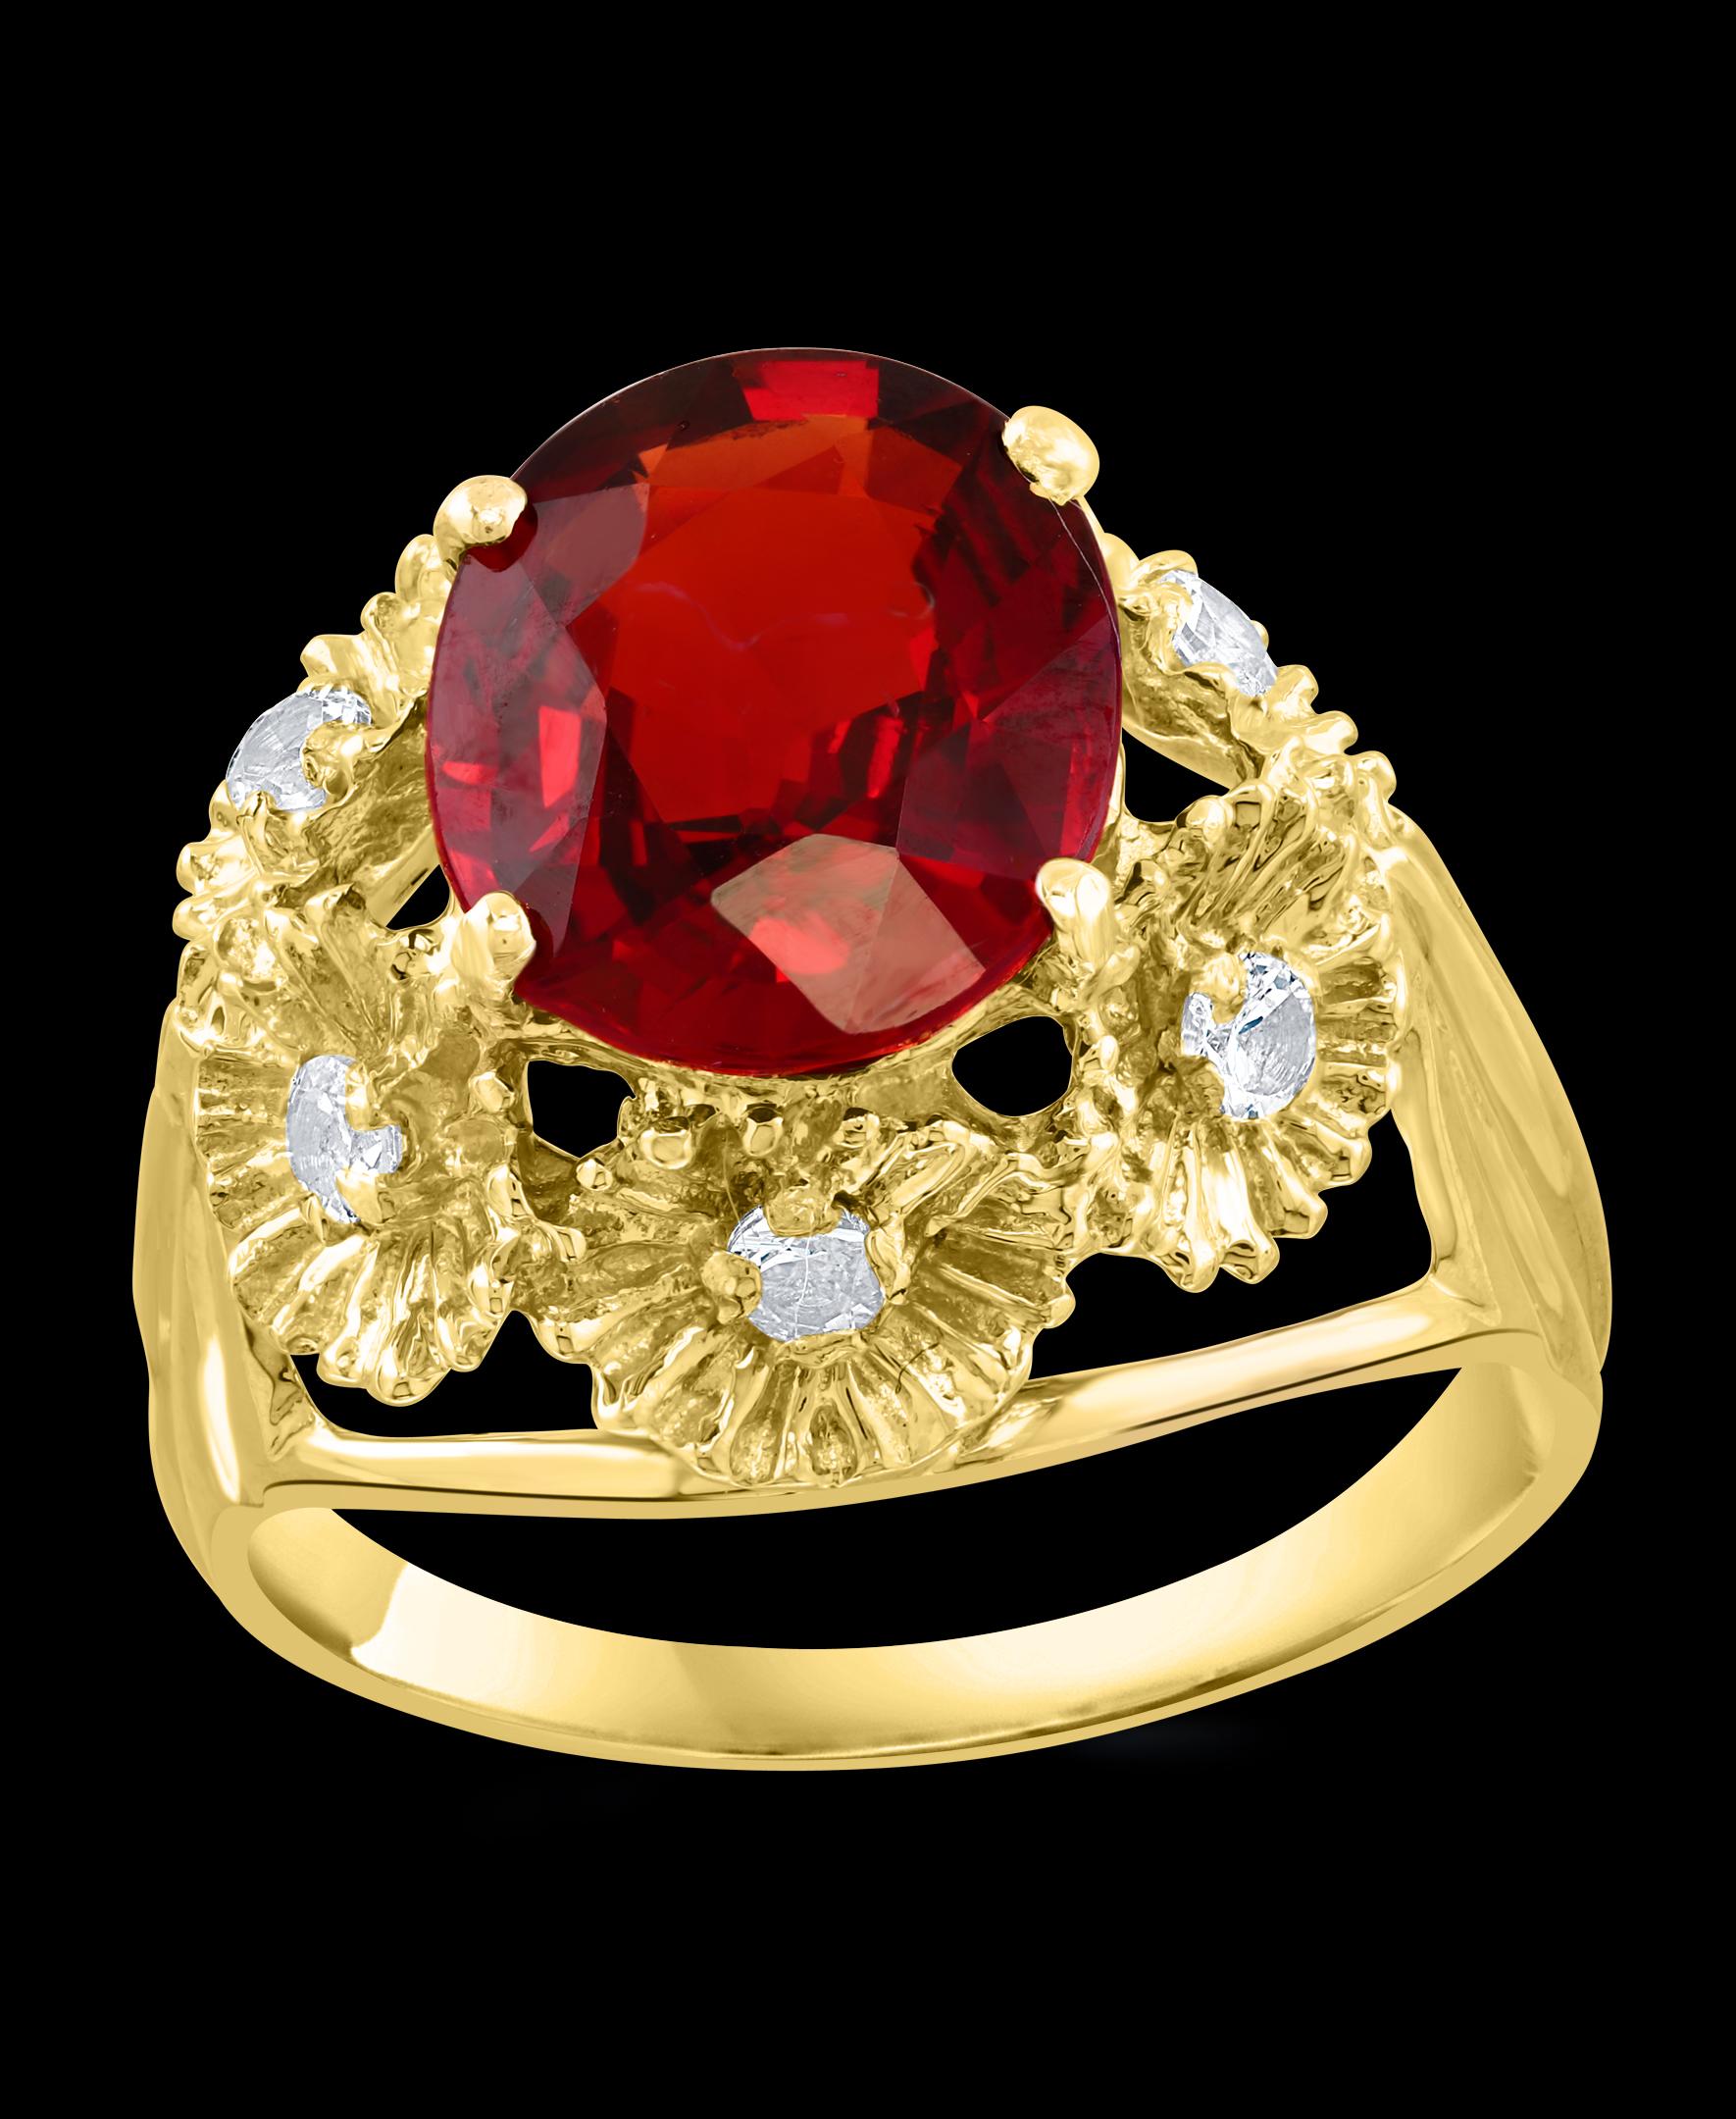 4.5 Ct Natural Spessartine Garnet & Diamond Ring 18 Karat Yellow Gold size 7.25
A classic, Cocktail ring 
9.5 X 11  Oval cut  Spessartine Garnet     & Diamond Ring 18 Karat Yellow Gold Size 7.25
Very Rare and Popular stone , the color  luster and